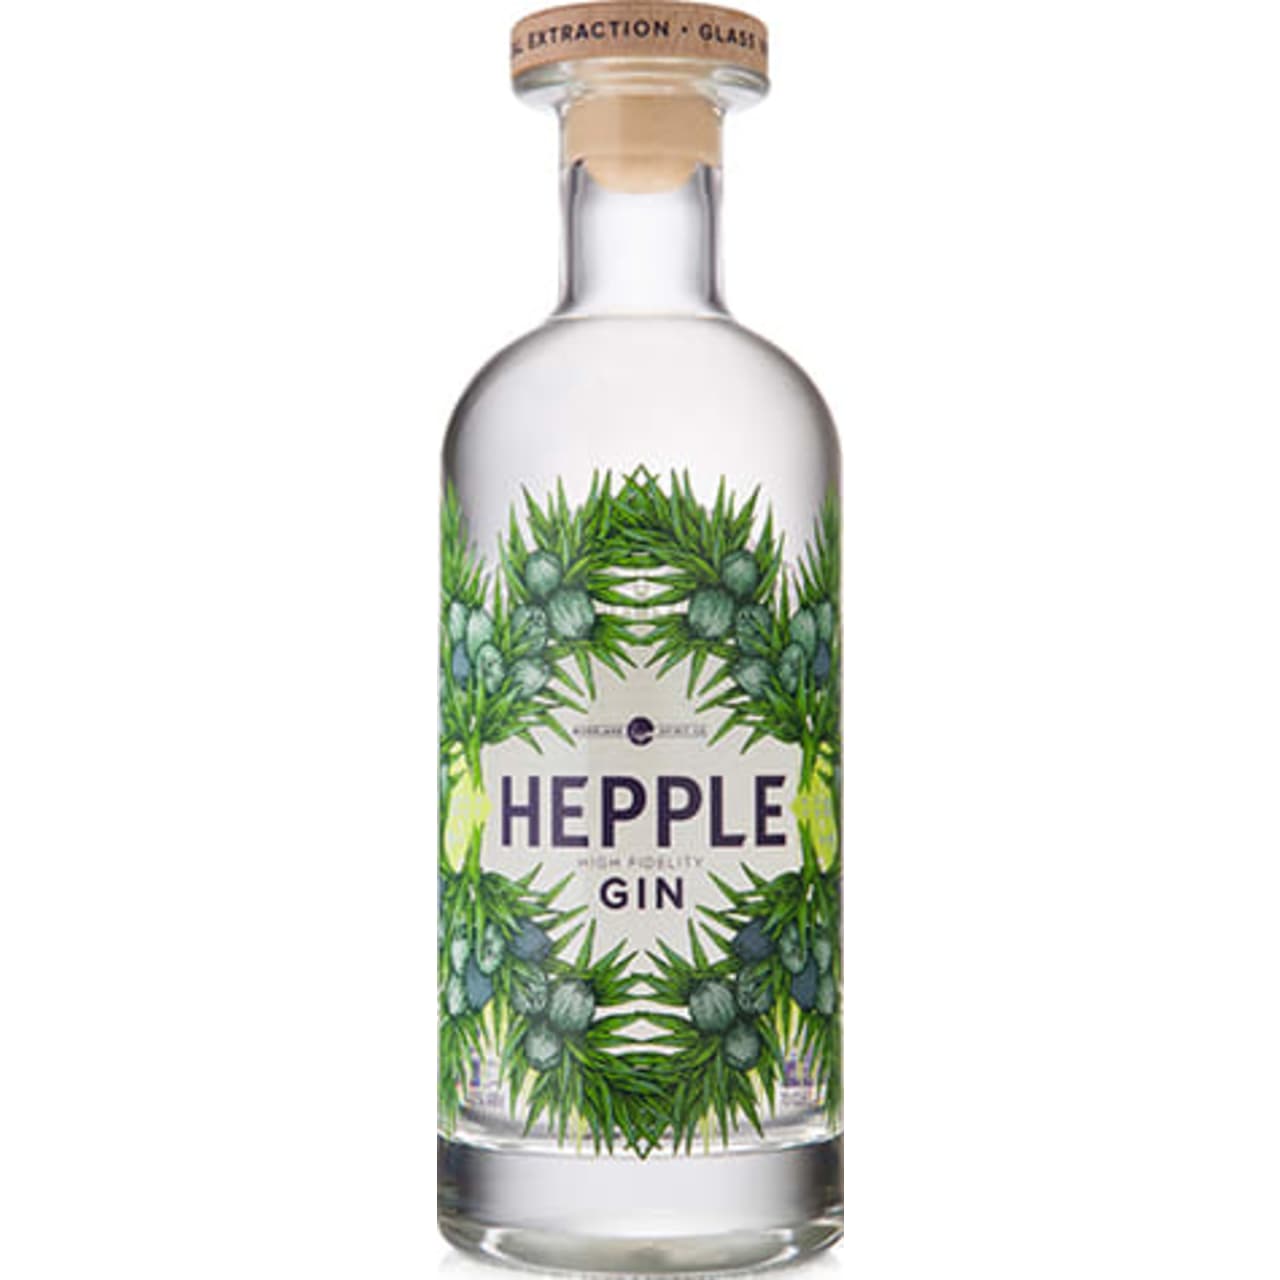 Hepple Gin uses an innovative three-level process for extracting botanical flavours. The heavier ones are distilled with the grain, lighter examples are vacuum distilled, and juniper flavour is extracted using carbon dioxide.